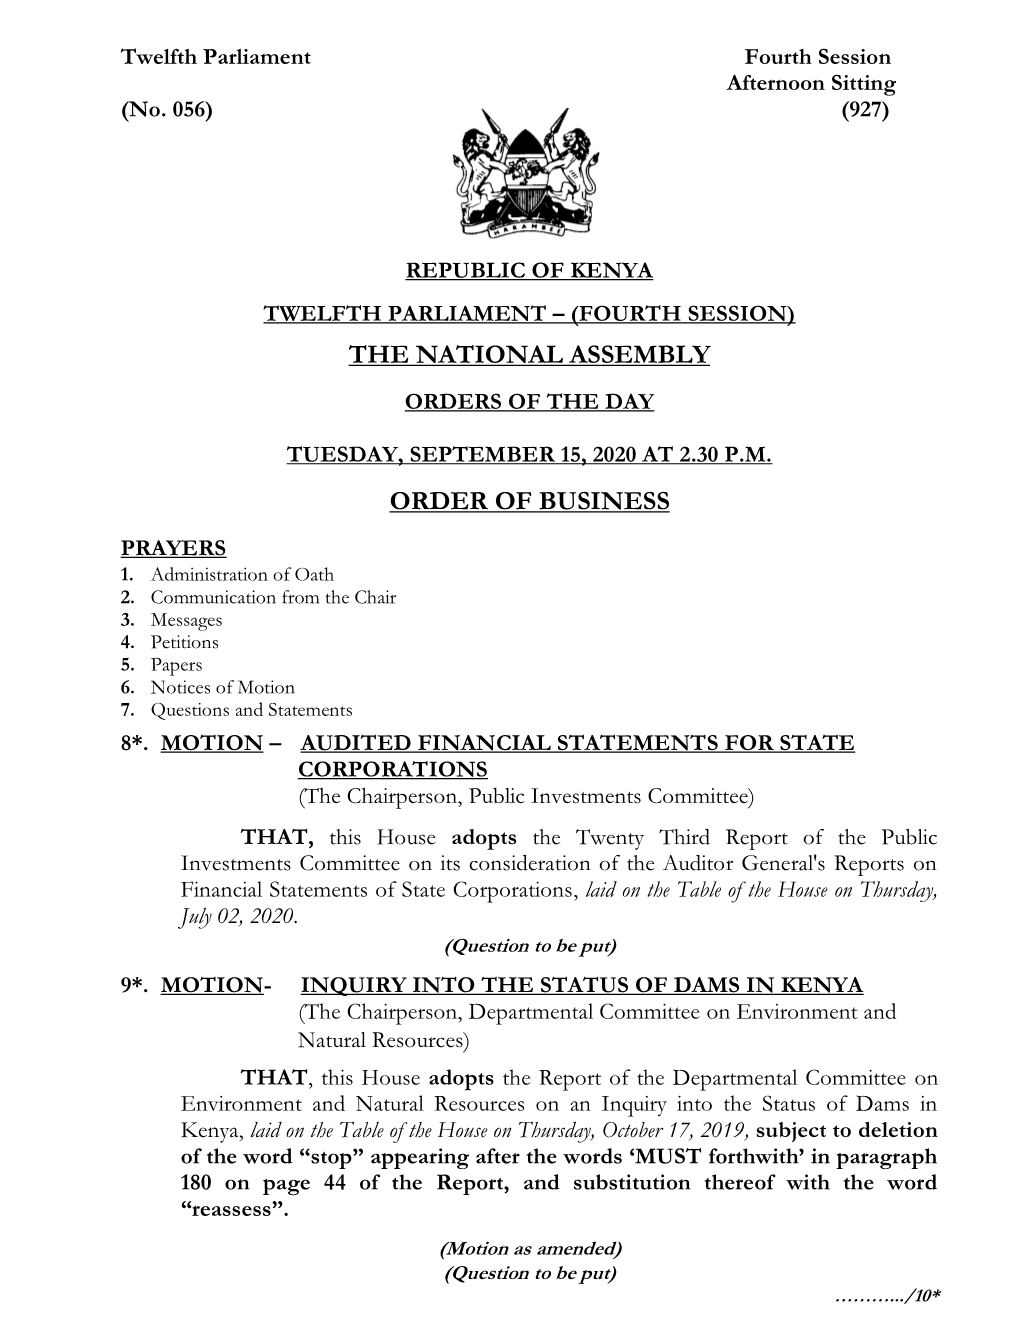 The National Assembly Order of Business